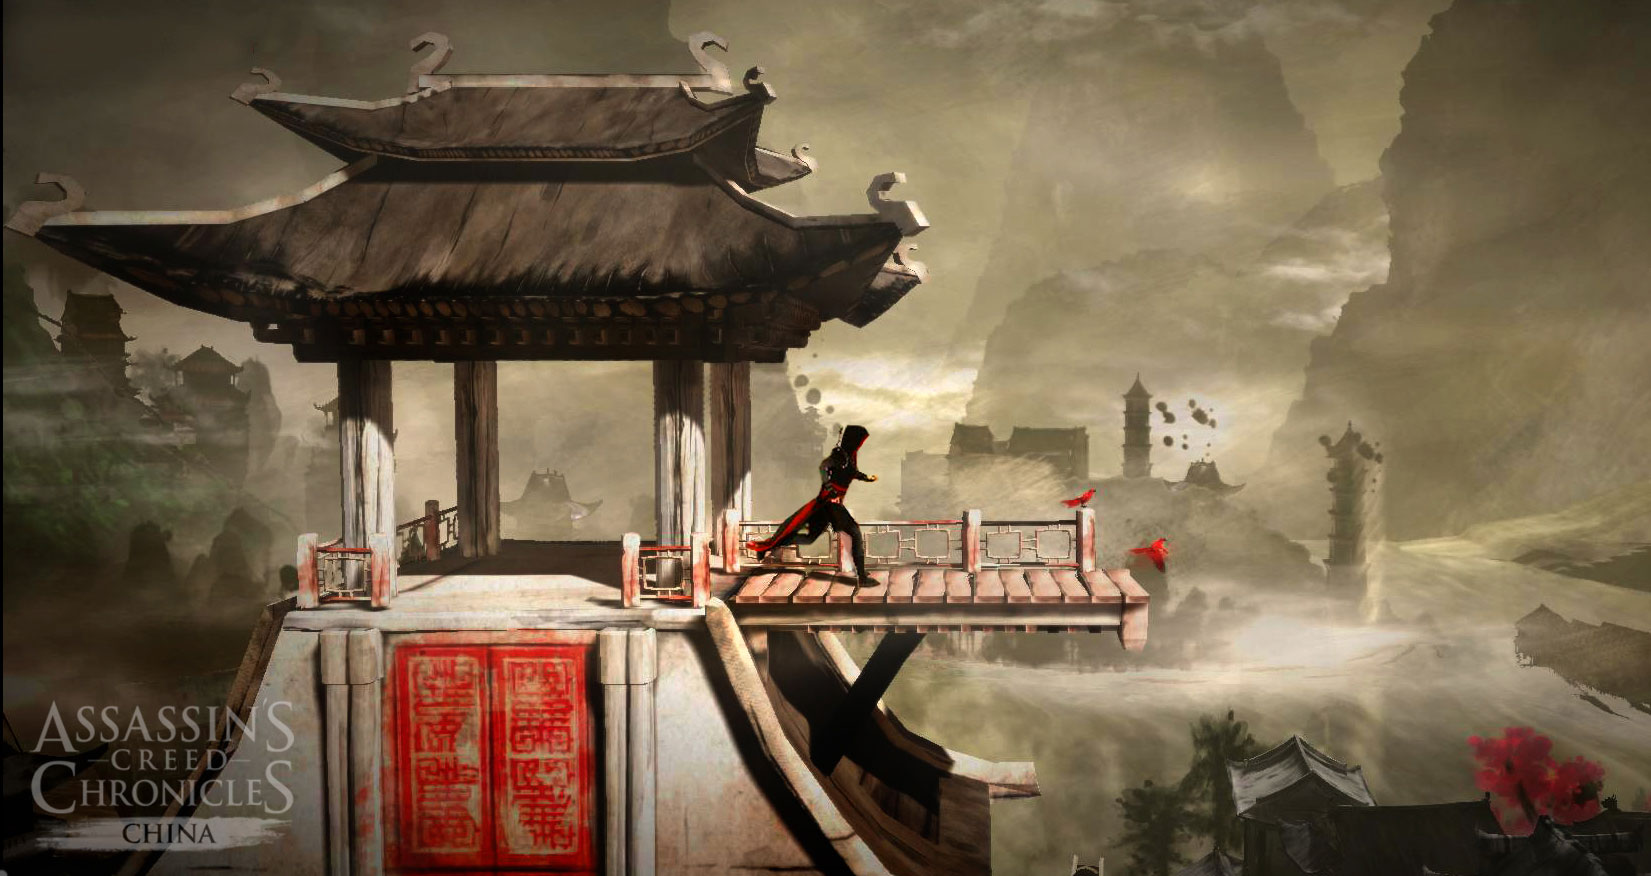 Ps4 Assassin's Creed Chronicles